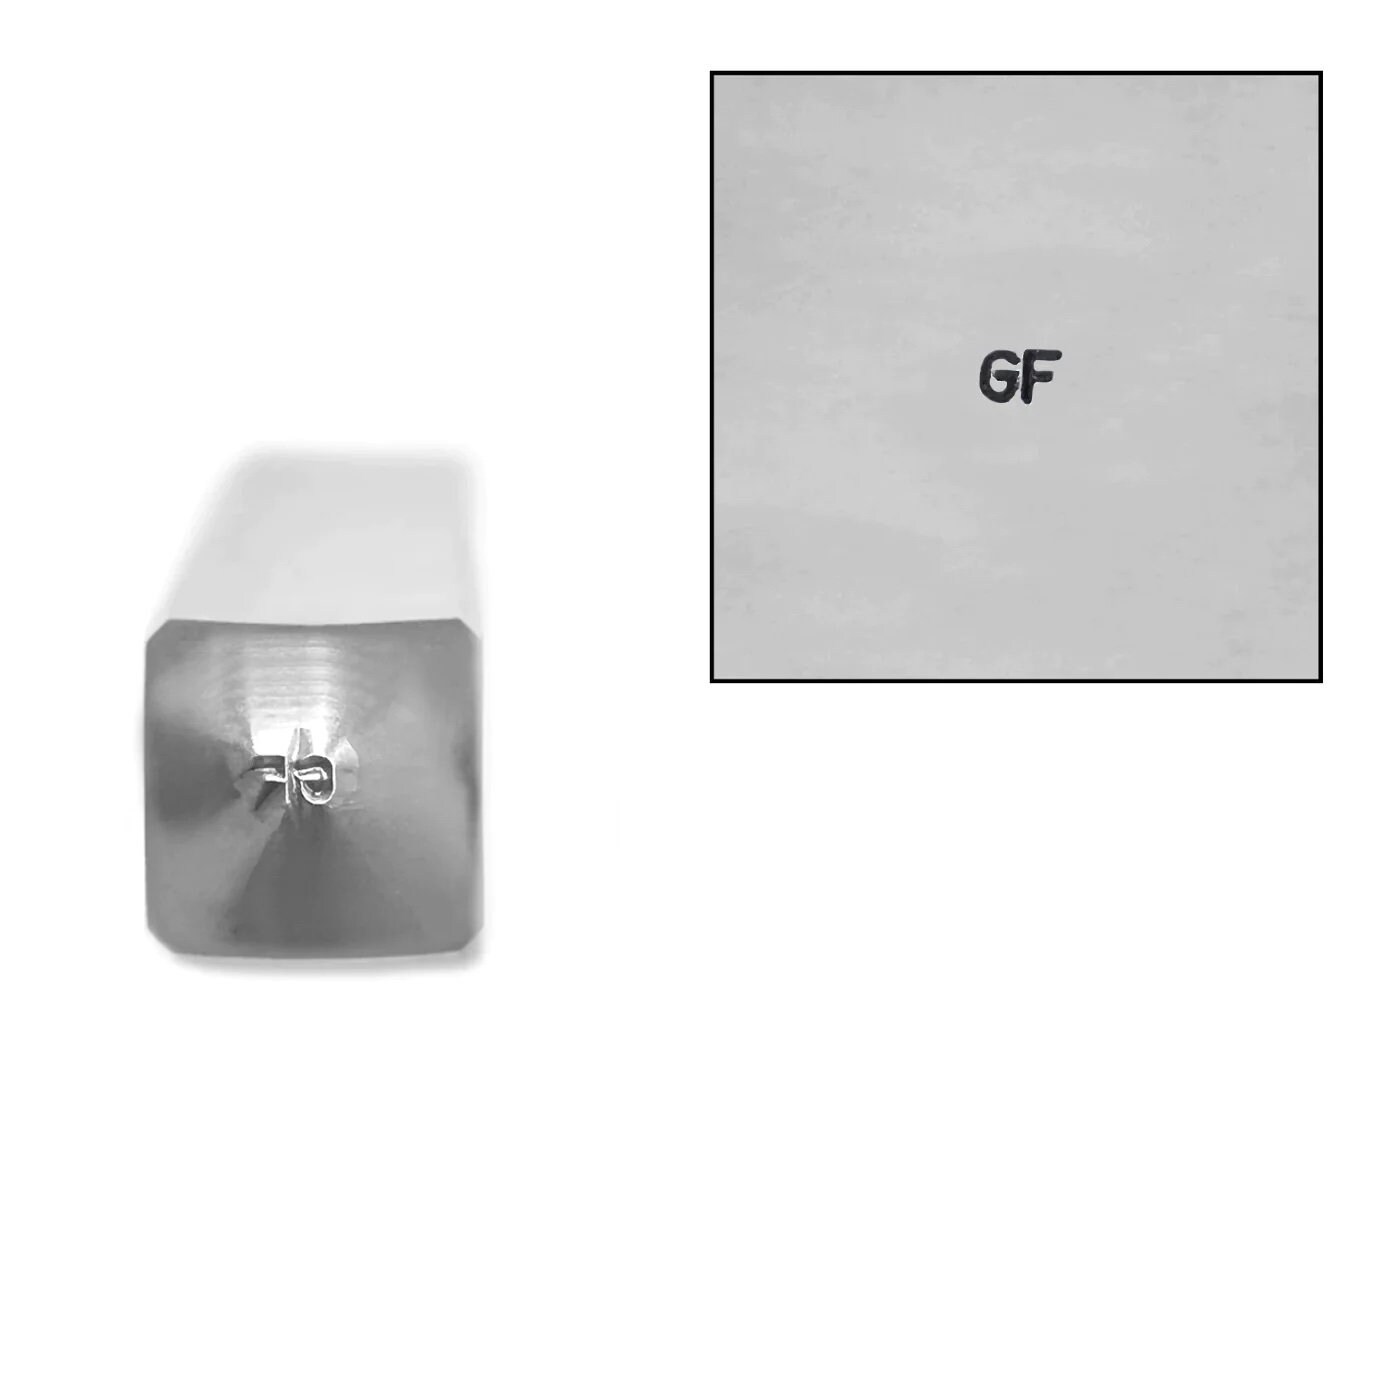 Signature Stamp 38mm x 38mm(1.5 inch). Metal Clay Discount Supply